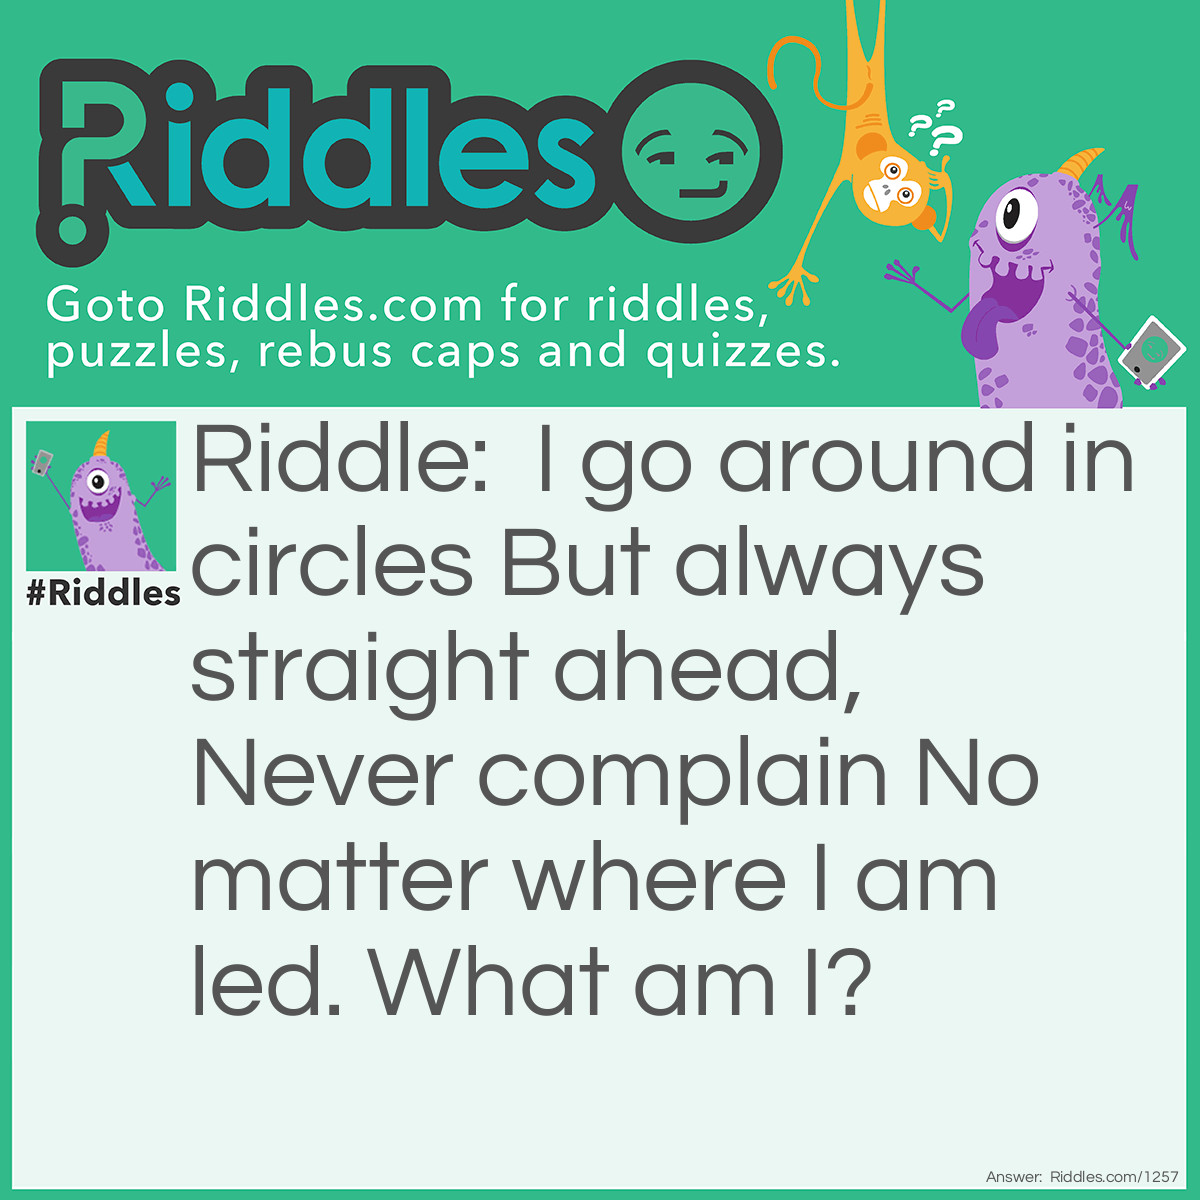 Riddle: I go around in circles But always straight ahead, Never complain No matter where I am led. What am I? Answer: A wagon wheel.